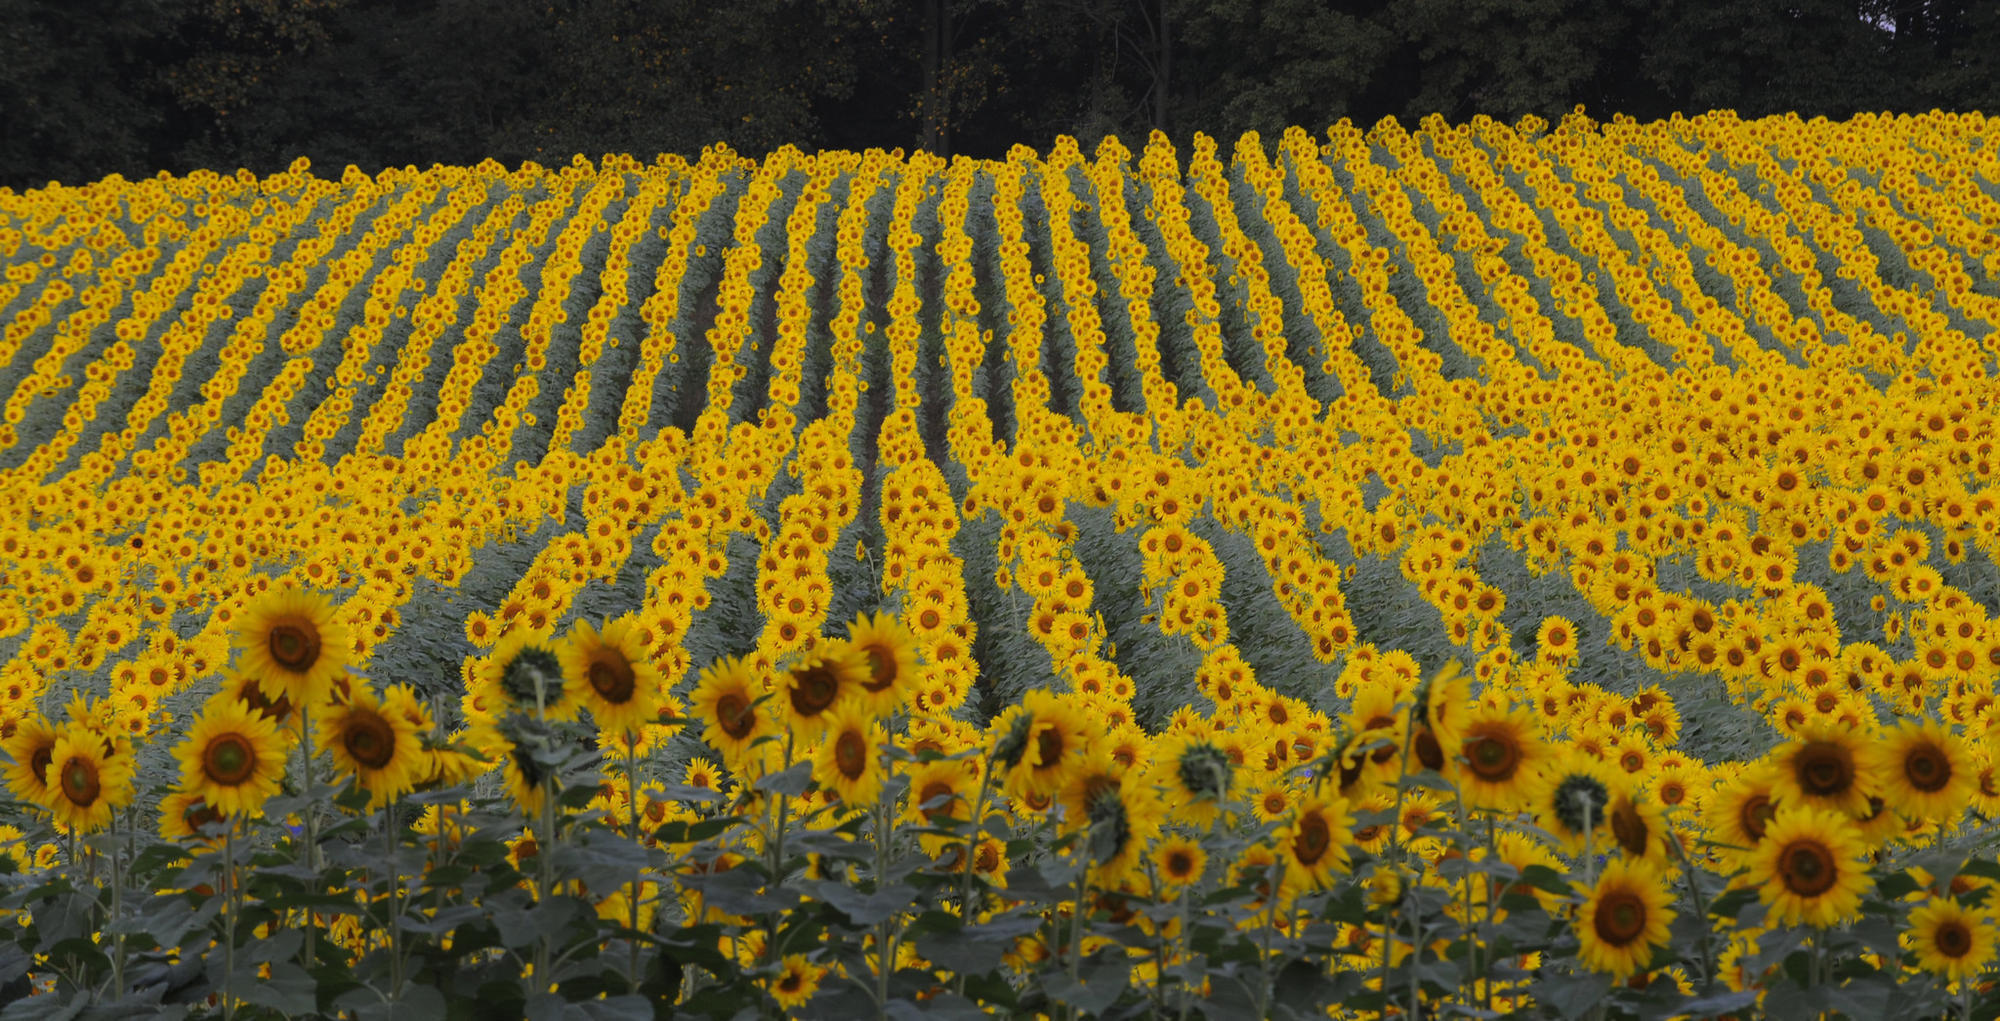 After being washed out by rain this summer, this Maryland sunflower field is now in full bloom ...